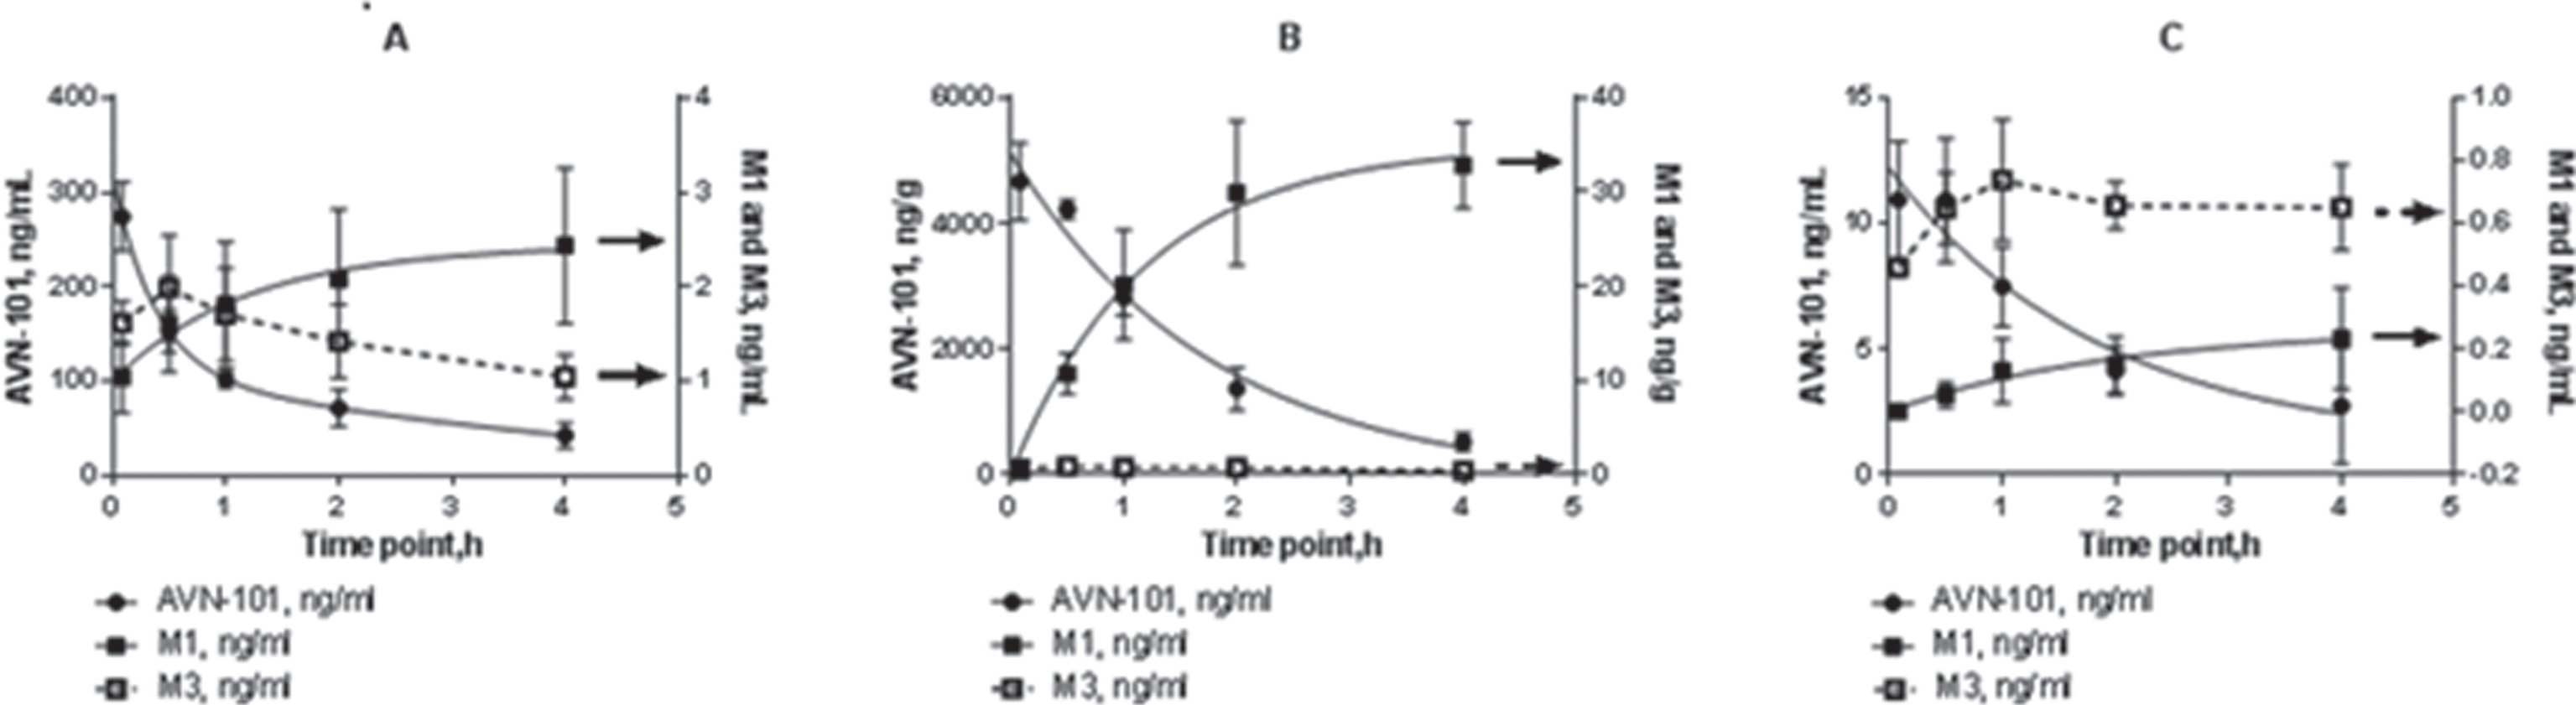 Pharmacokinetics of AVN-101 and its metabolites, M1 and M3, in plasma (A), brain (B), and CSF (C) of Sprague Dawley rats. AVN-101 was administered as a bolus in physiologic saline solution at a dose of 2 mg/kg through the tail vein.